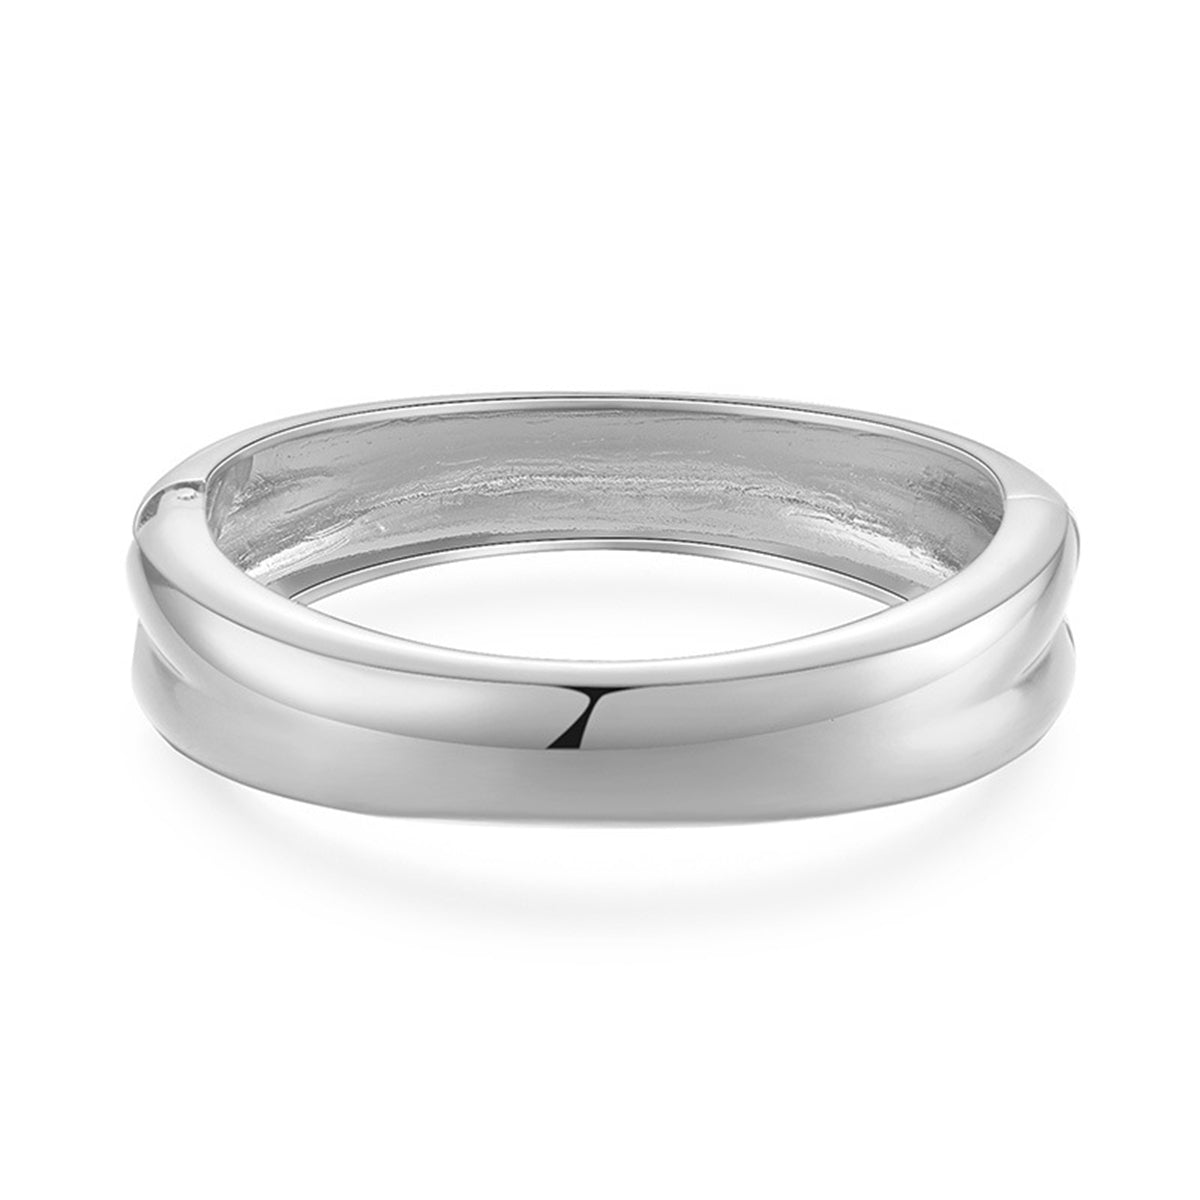 Silver-Plated Smooth Face Bangle